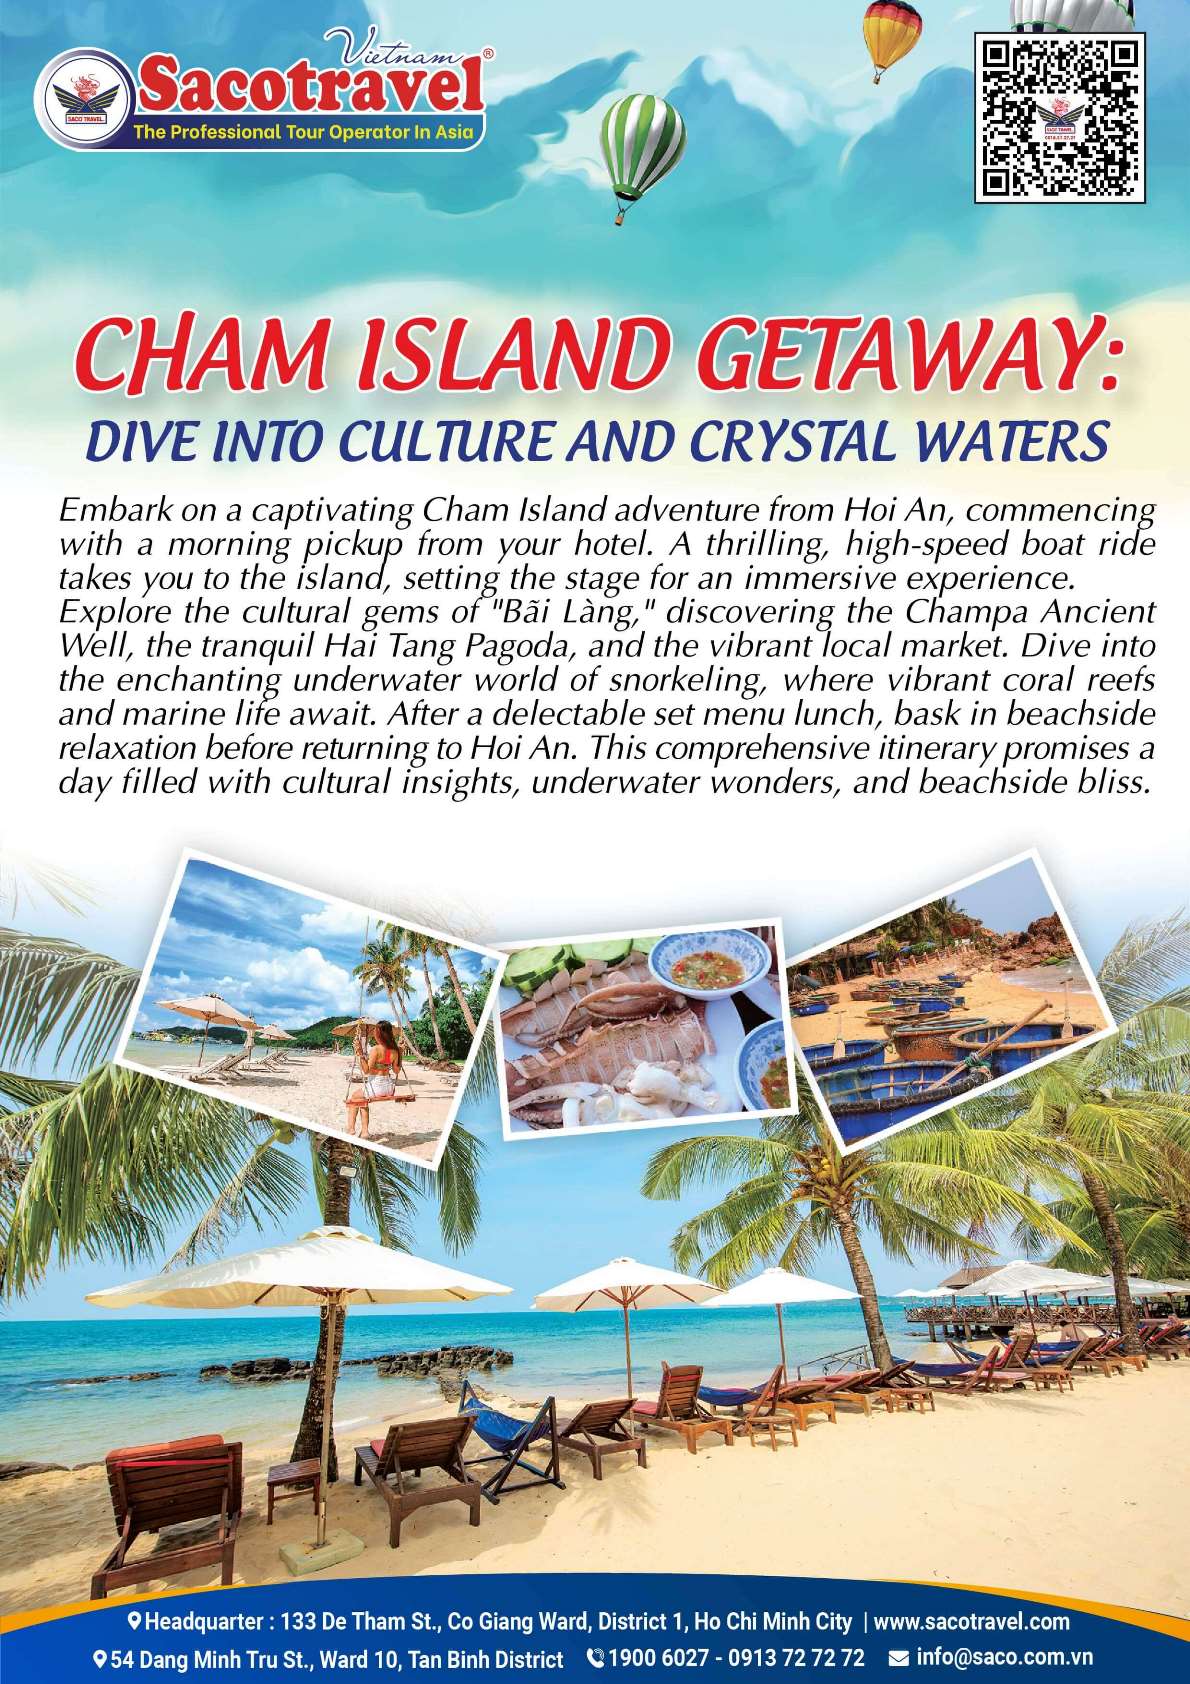 CHAM ISLAND GETAWAY DIVE INTO CULTURE AND CRYSTAL WATERS